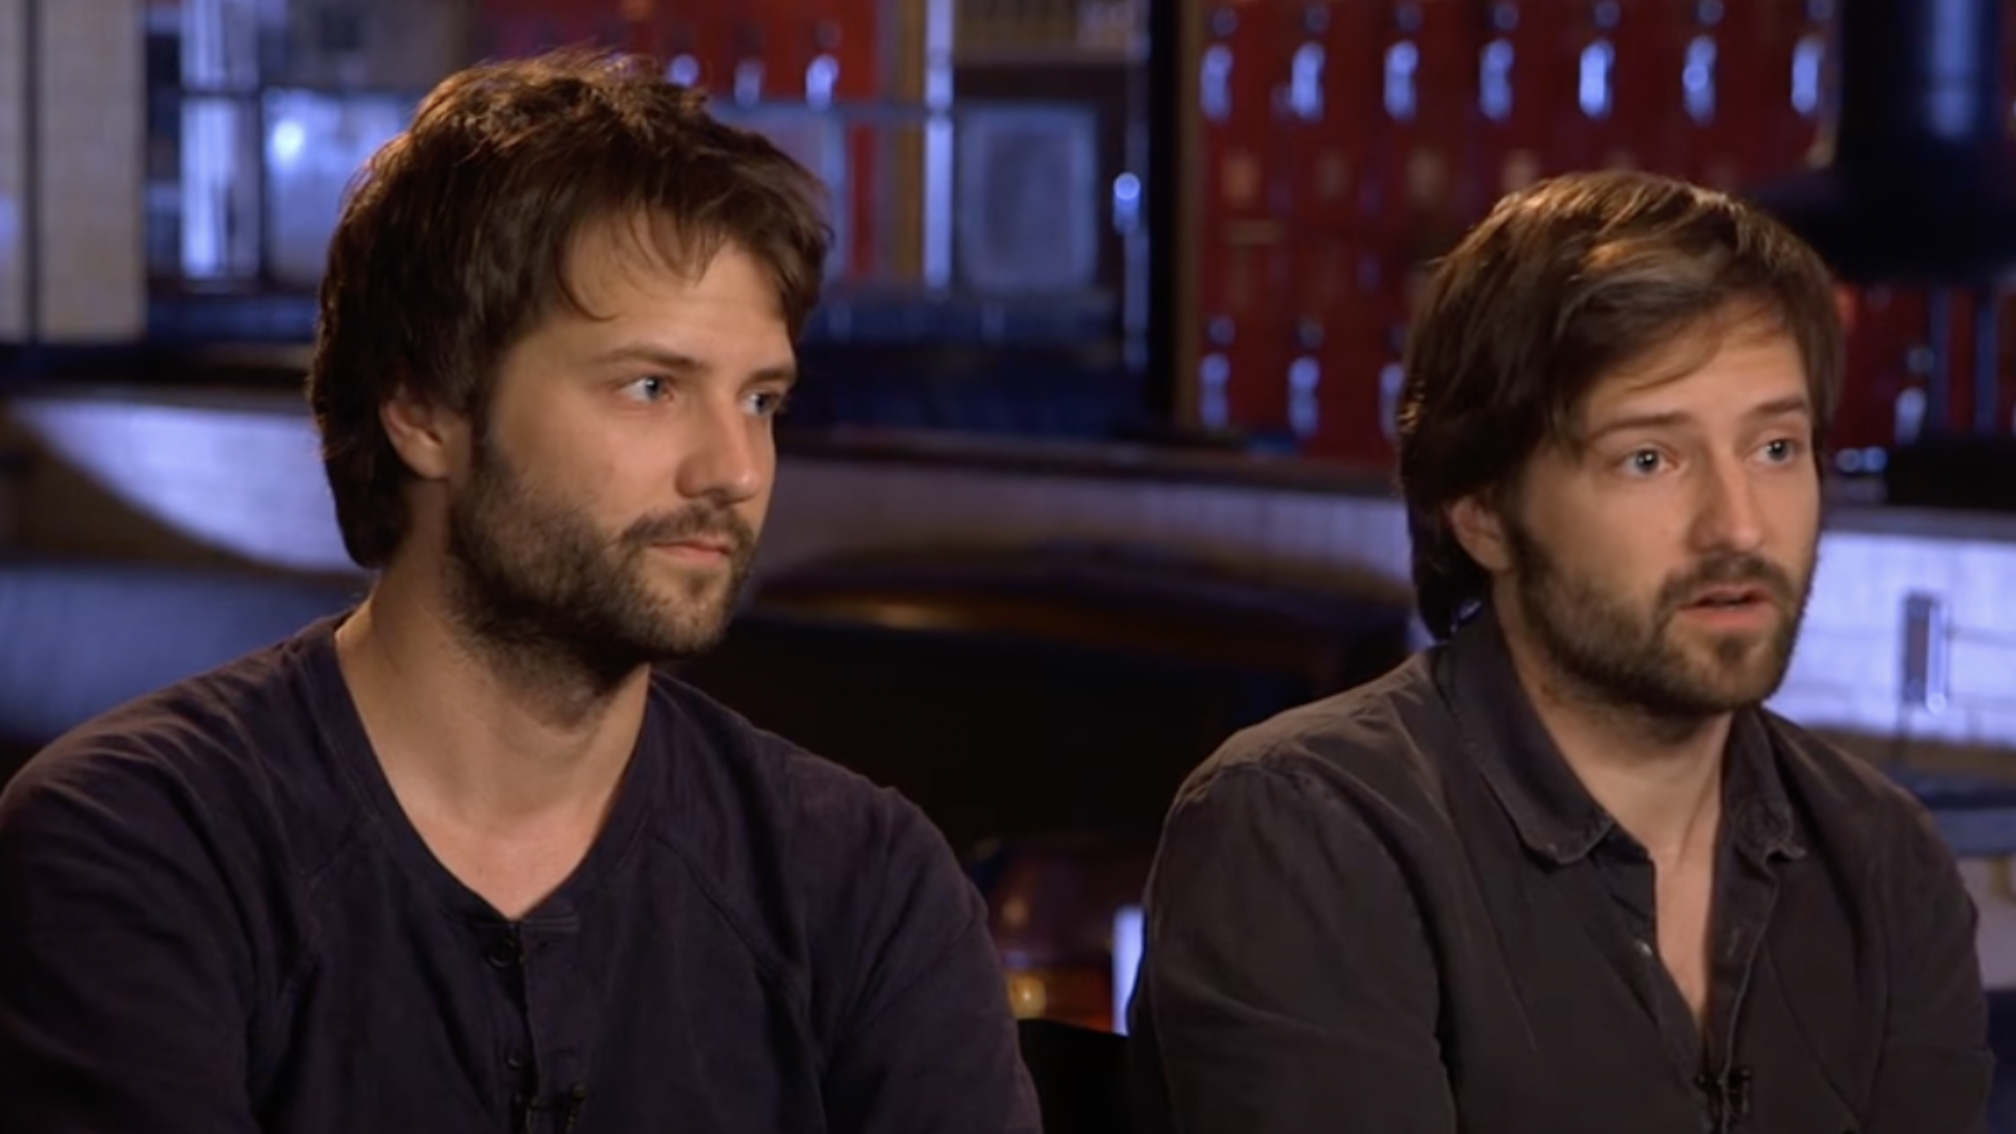 Duffer Brothers originally planned to kill another character in